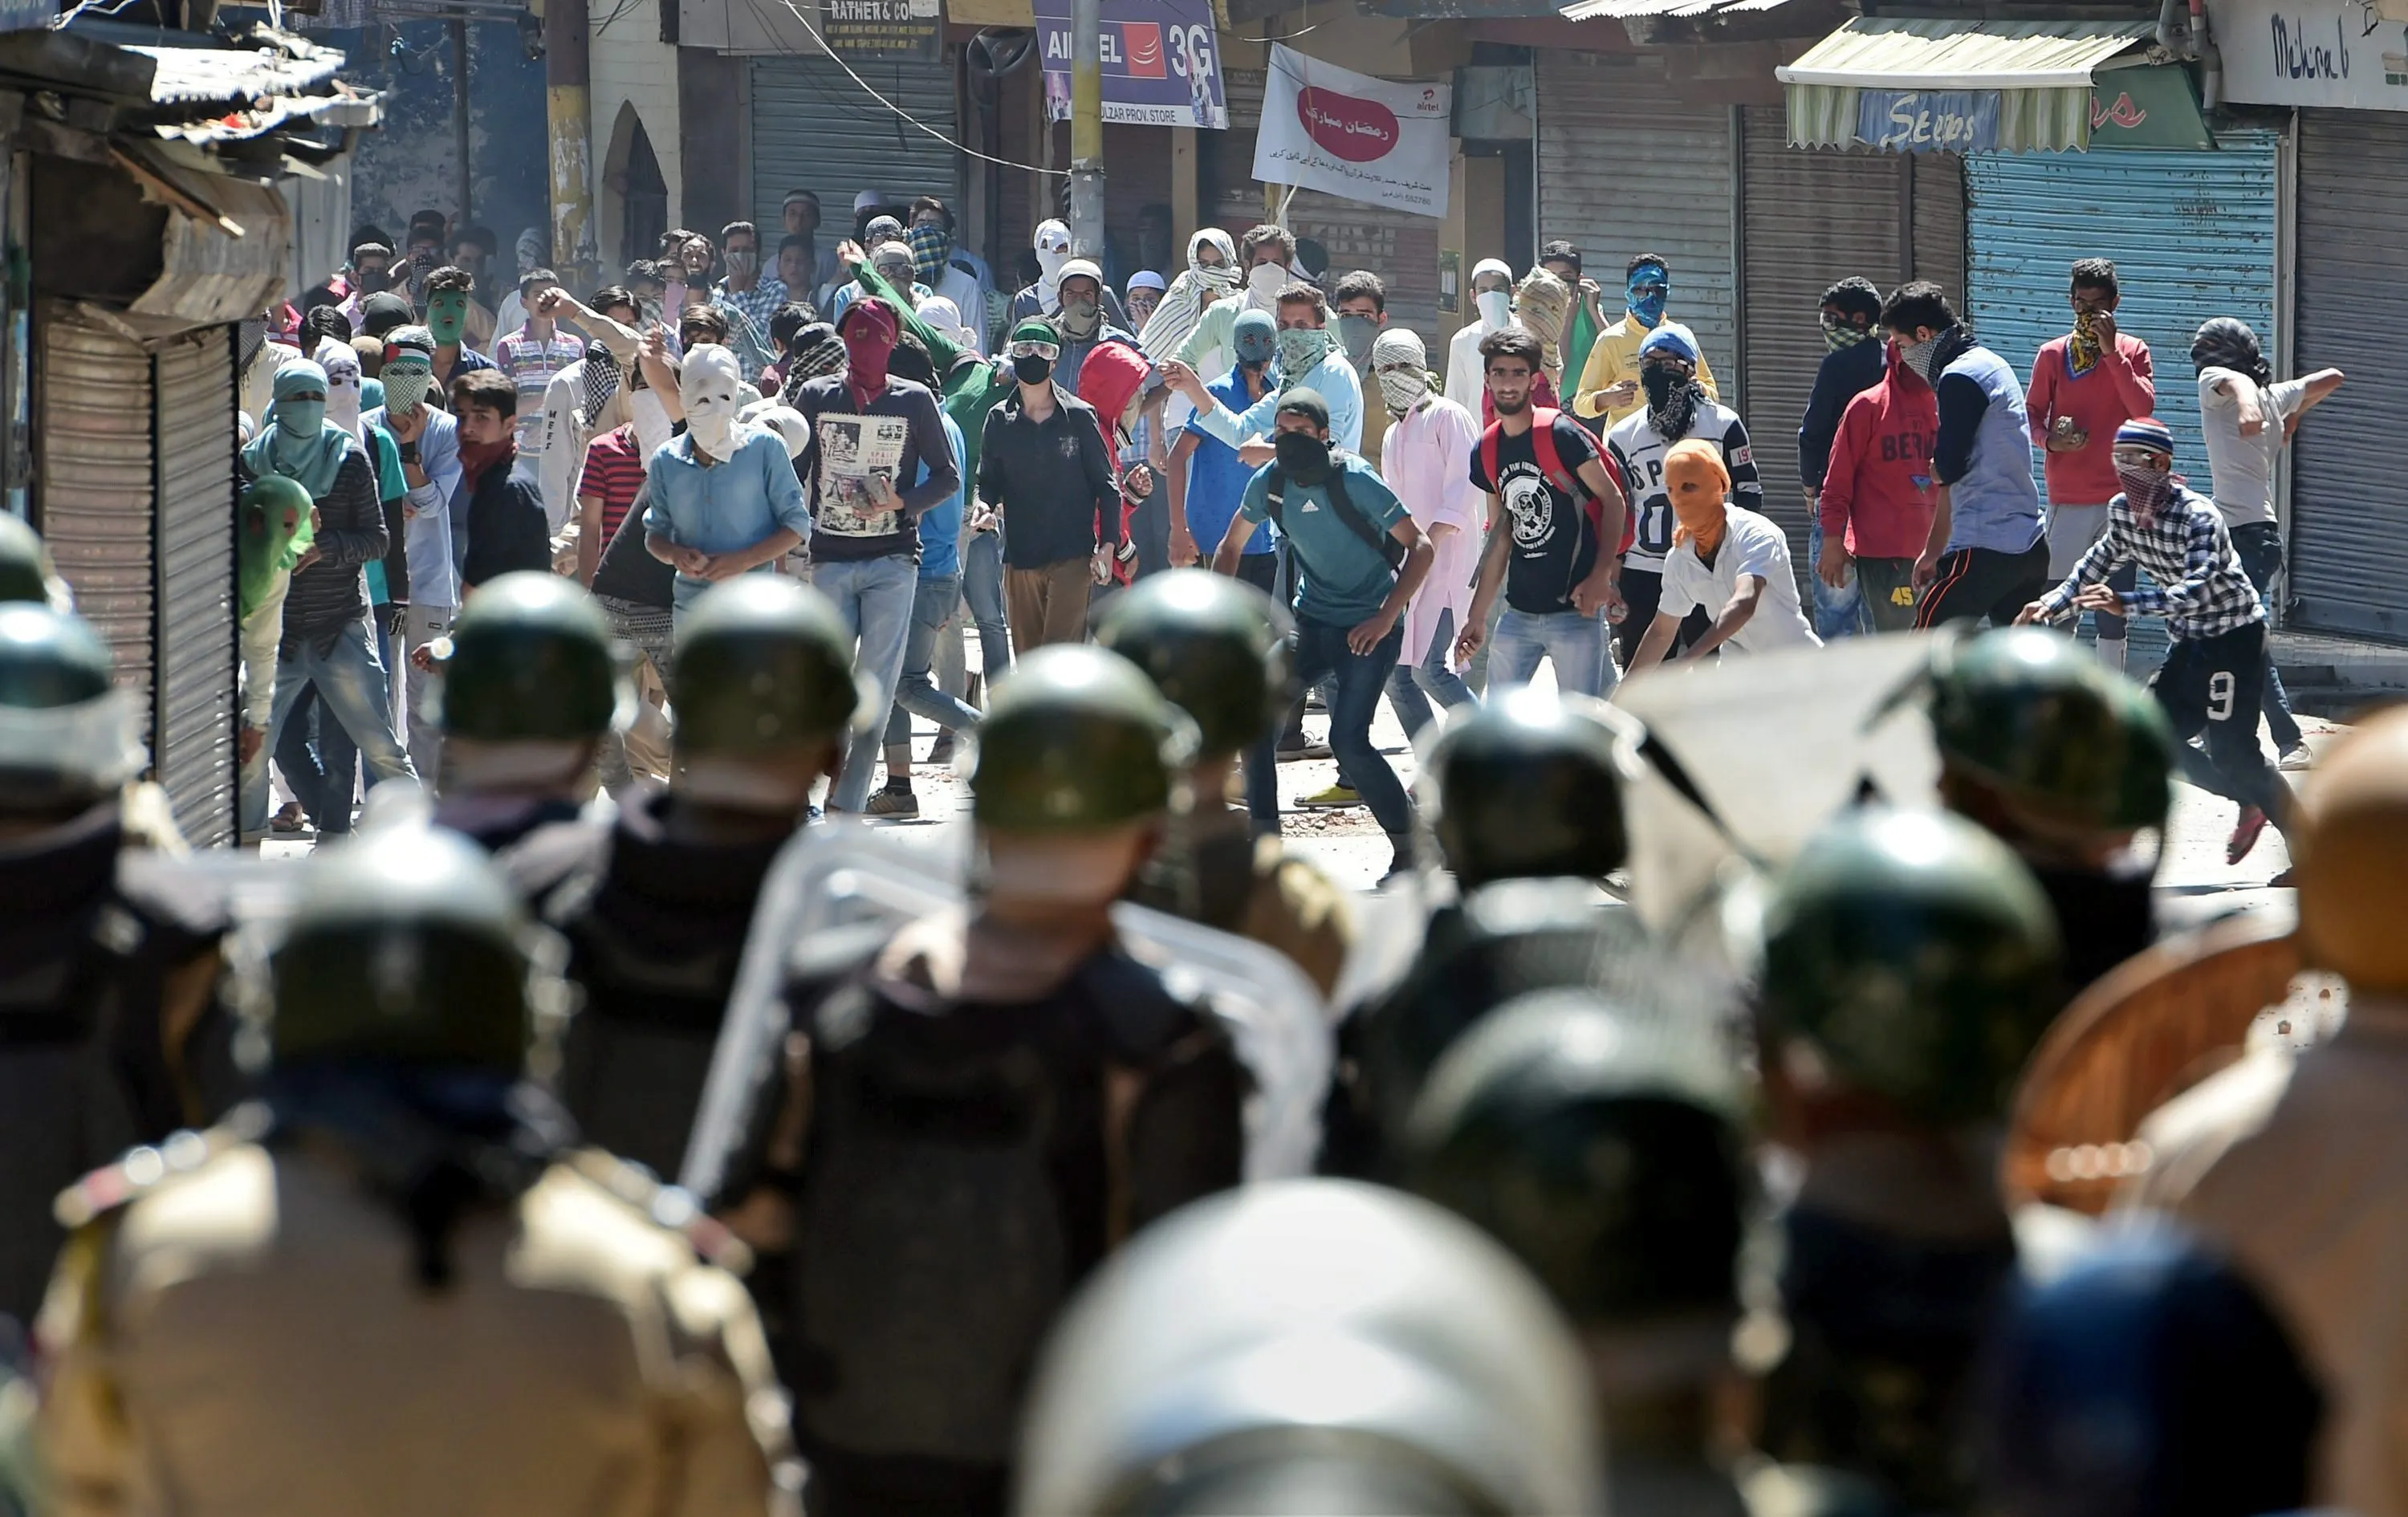 Lesson from #Kashmir: There is urgent need for trained riot police